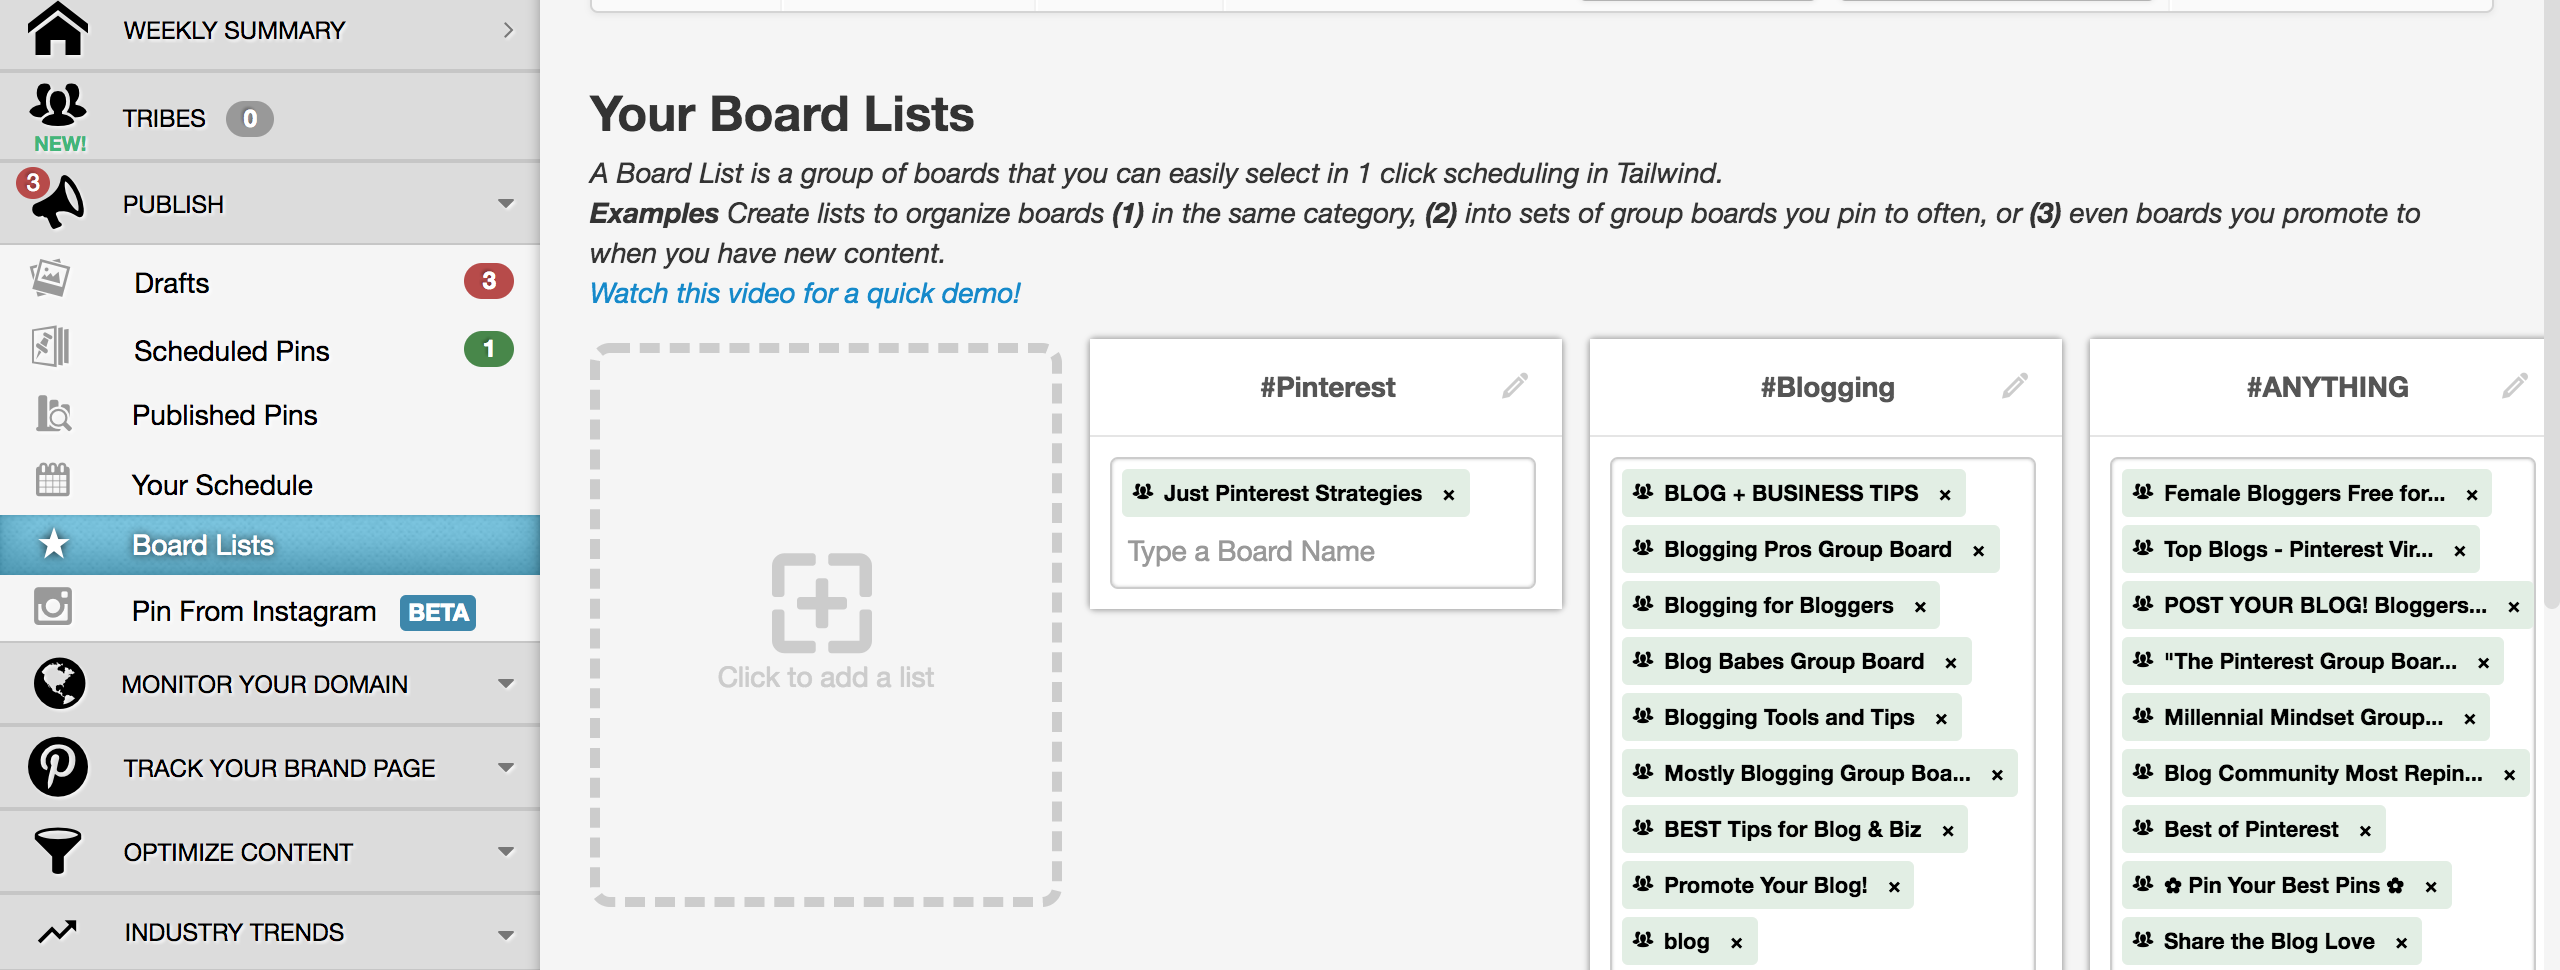 Creating Board Lists With Tailwind To Increase Traffic From Pinterest